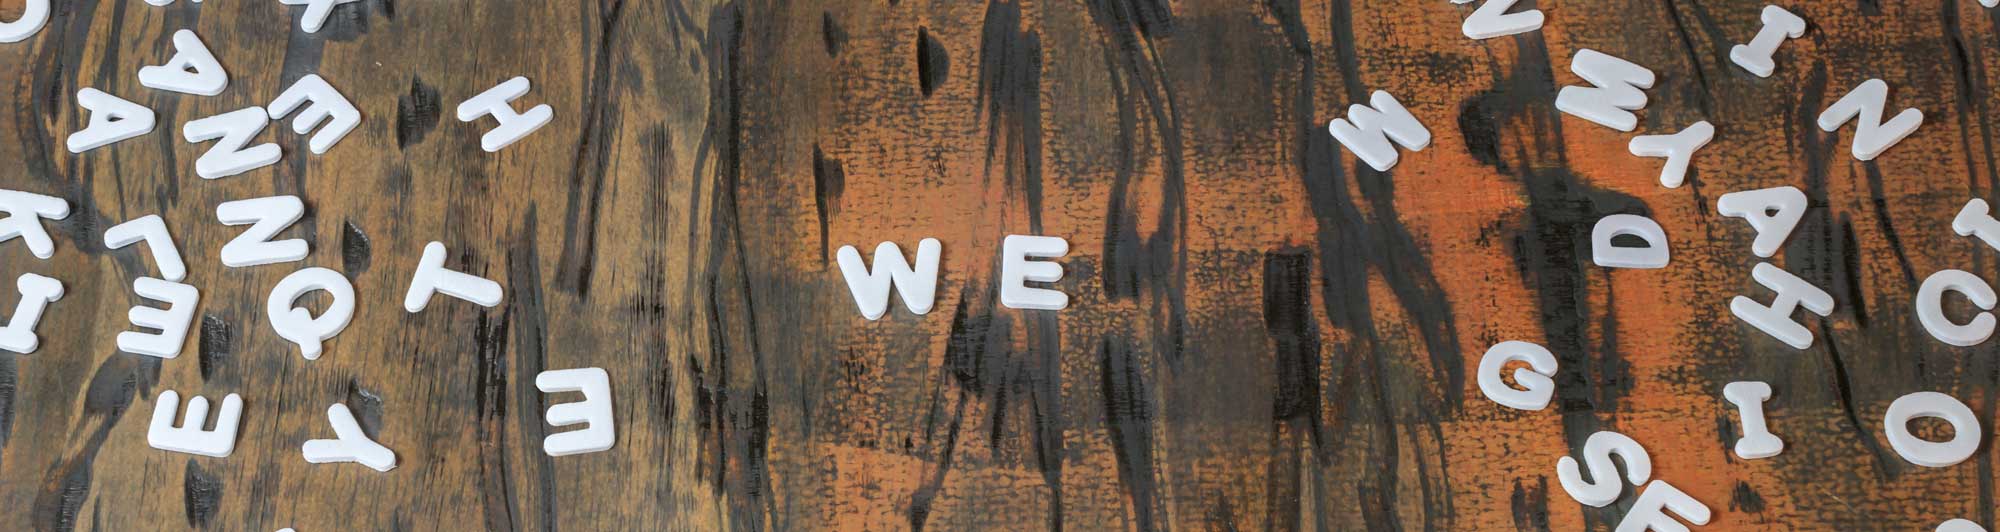 Plastic letters scattered on a table with the word "we" in the center